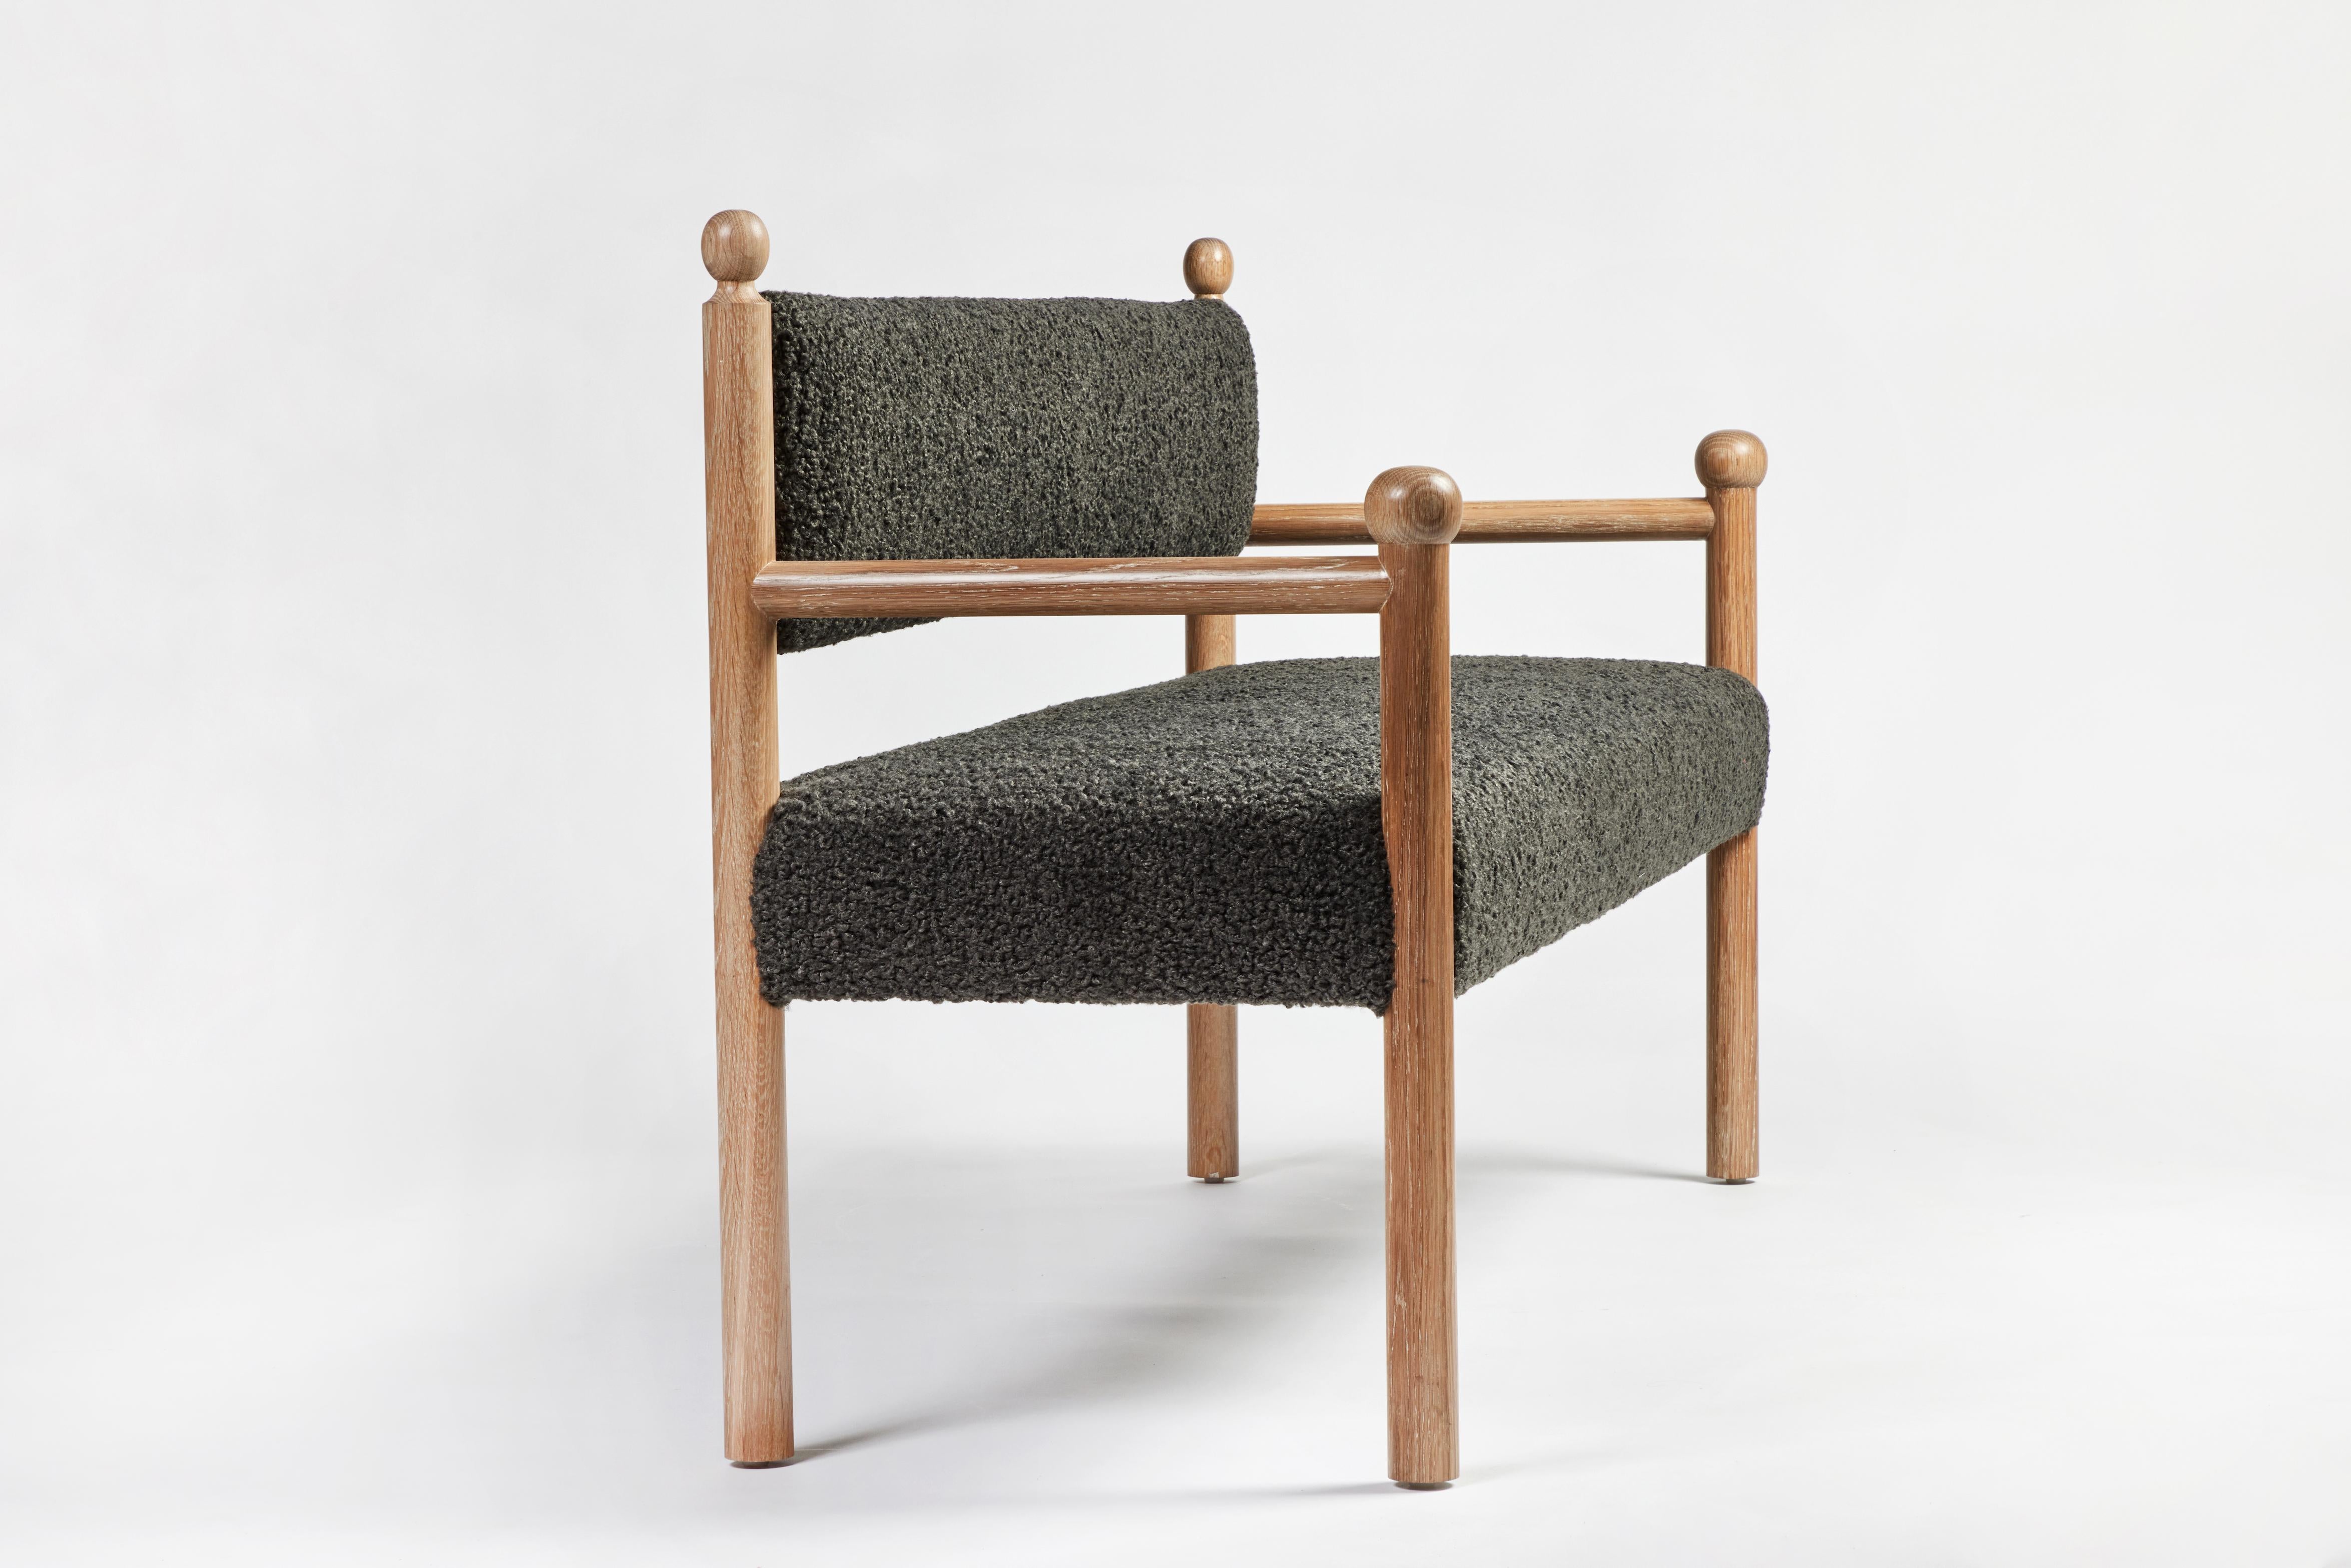 The Martin and Brockett Sydney Bench has a wood frame with final details on the chair back and arm. Upholstered seat and back. In light fumed on oak. 

Fabric is C.O.M. only- 6 yards.

